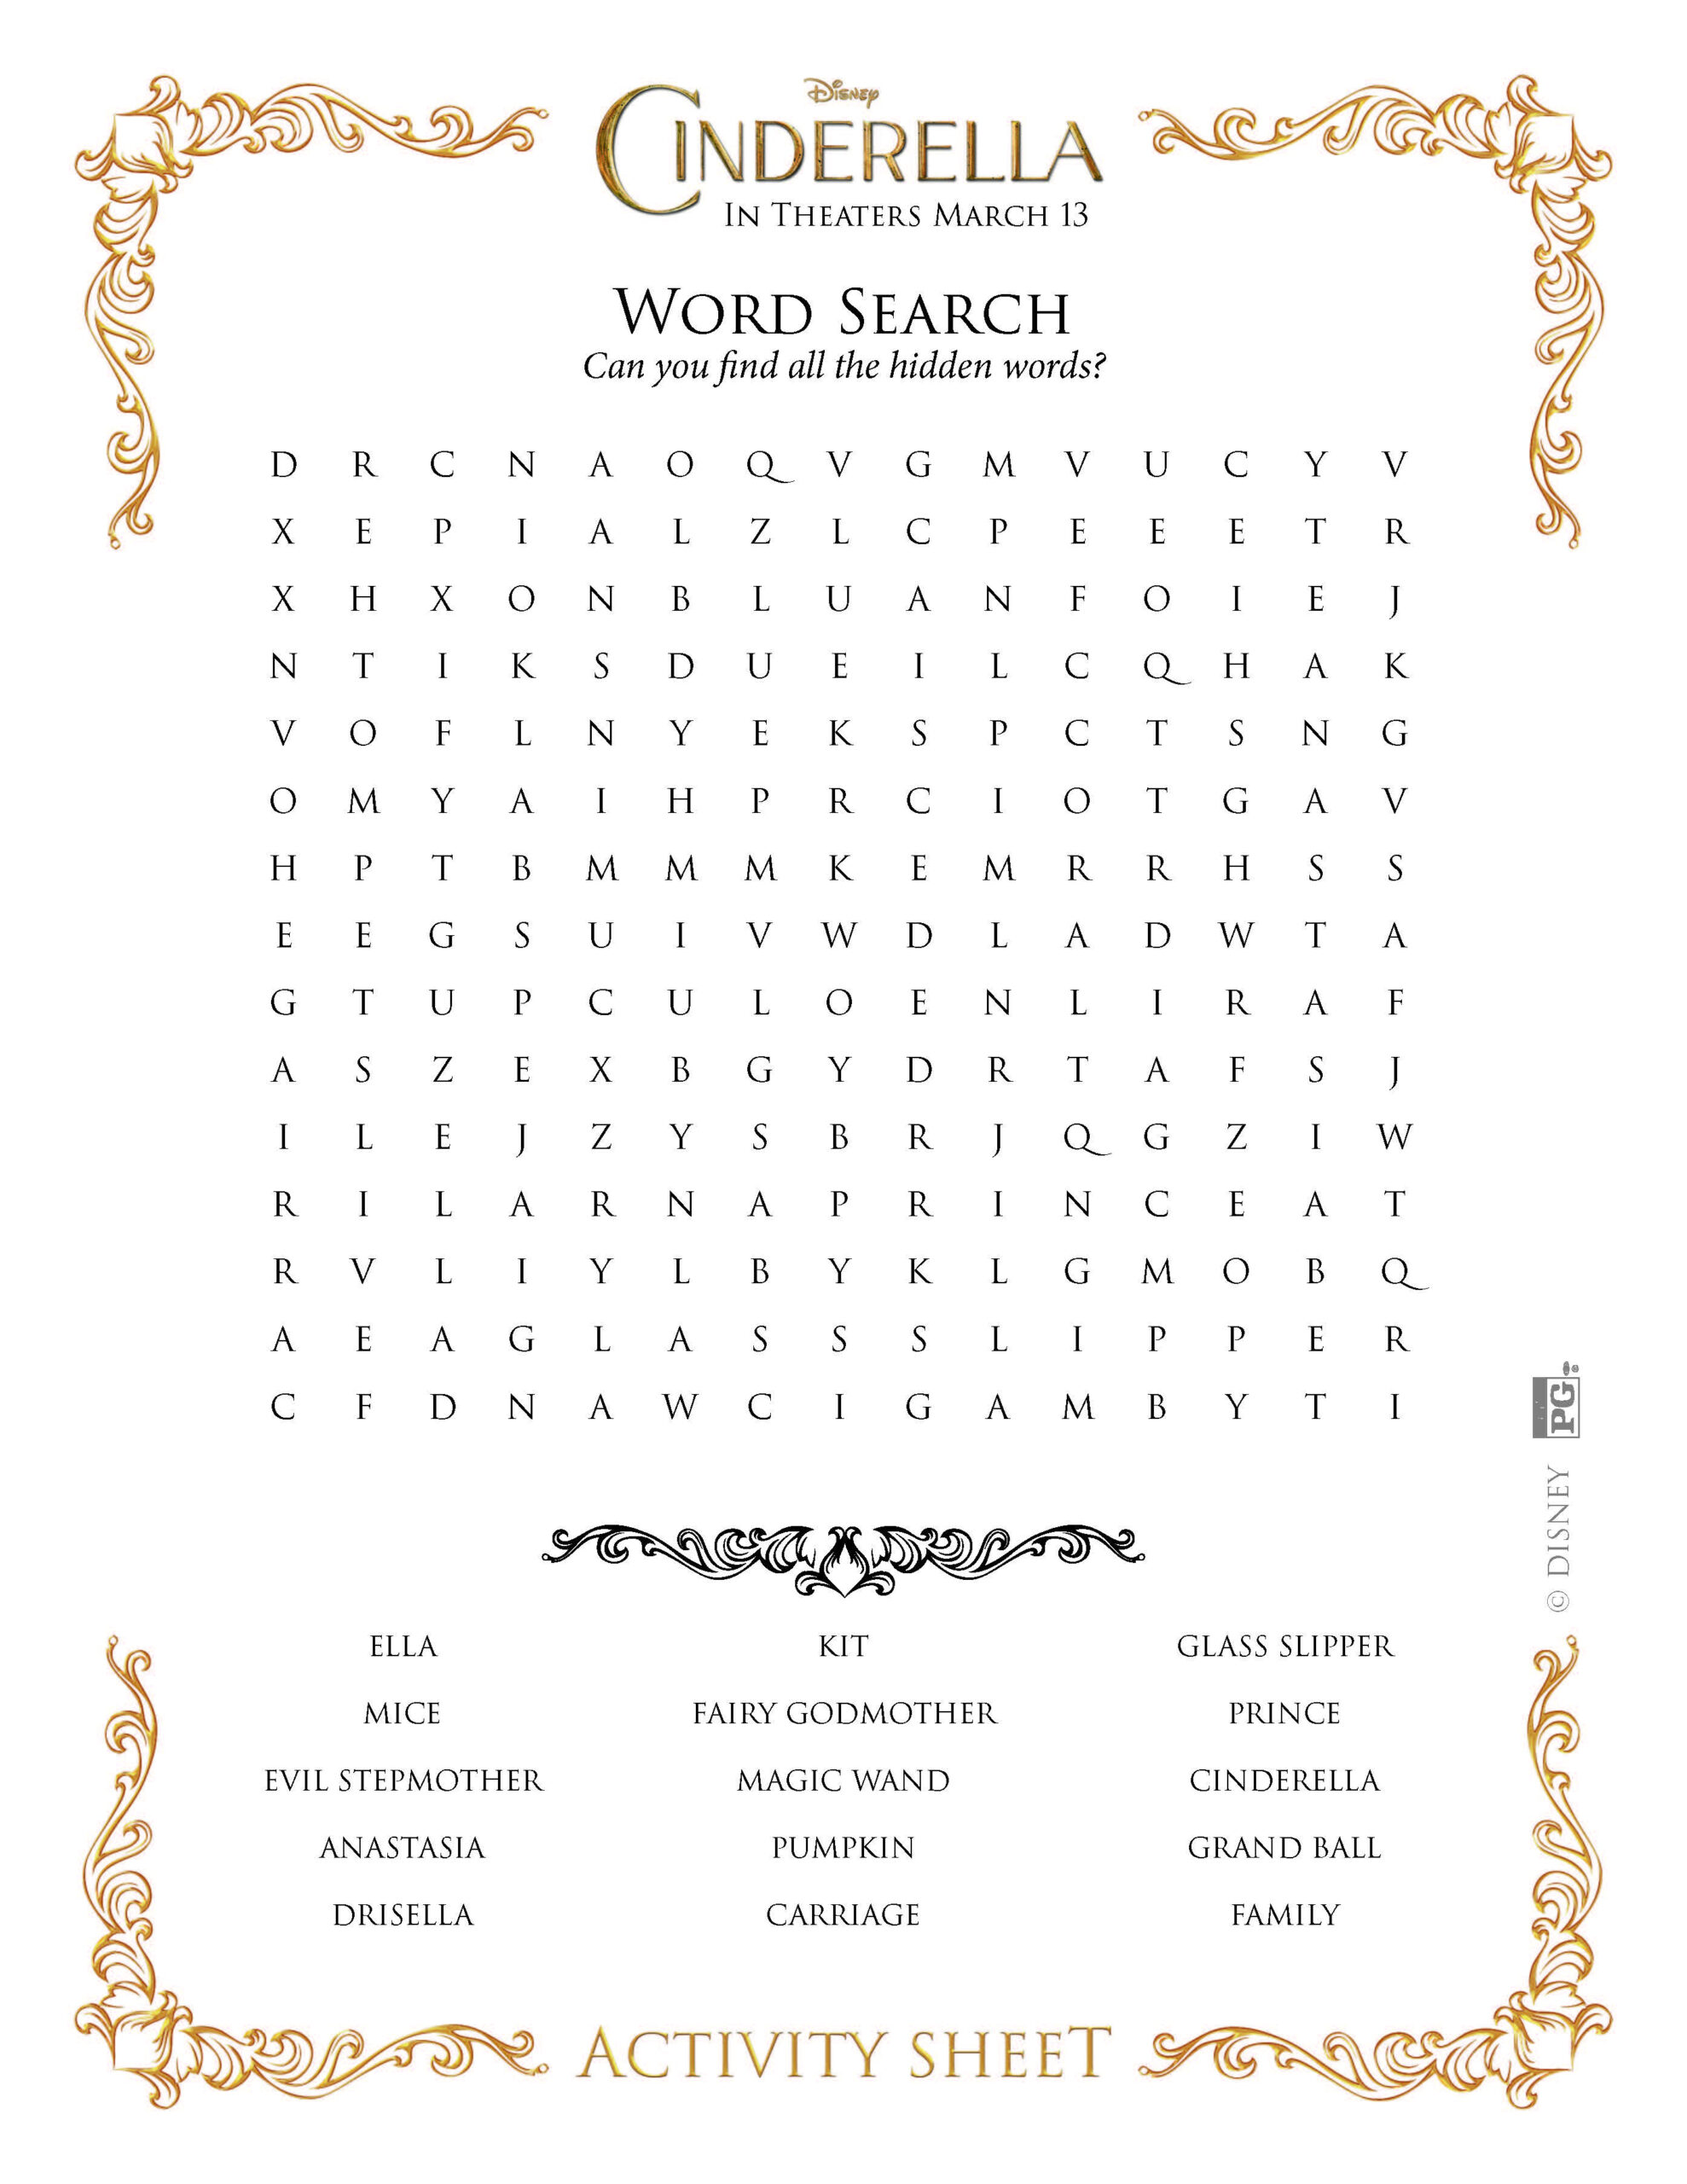 Free Cinderella Printable Activity Sheets  Highlights with regard to Disney World Word Search